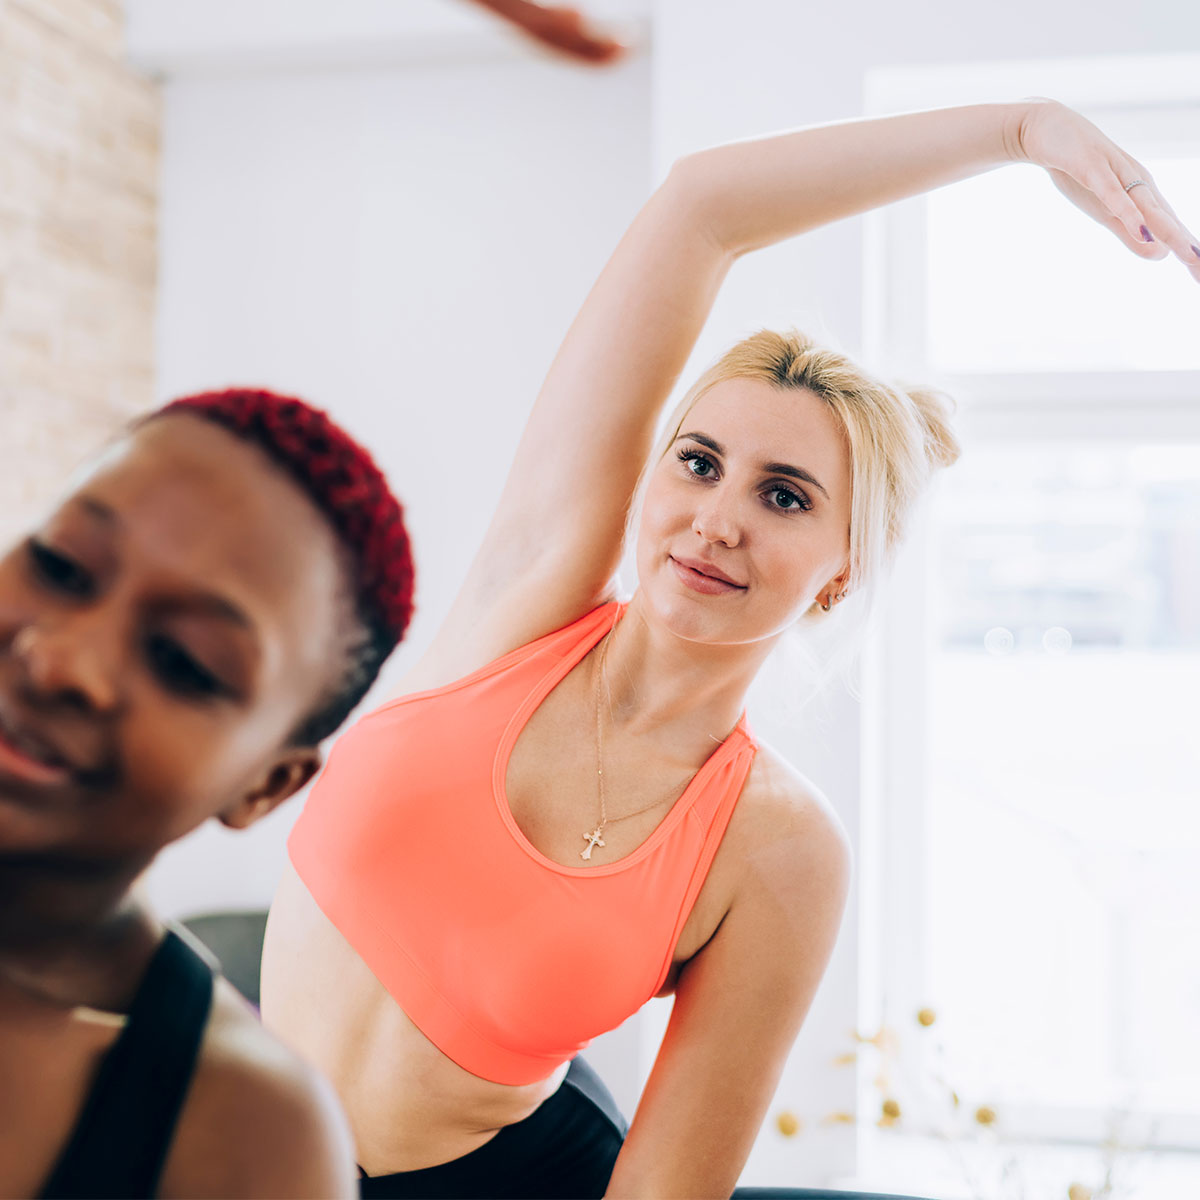 What is Barre?  This exercise can help you burn calories, strengthen your core muscles, and sculpt your body